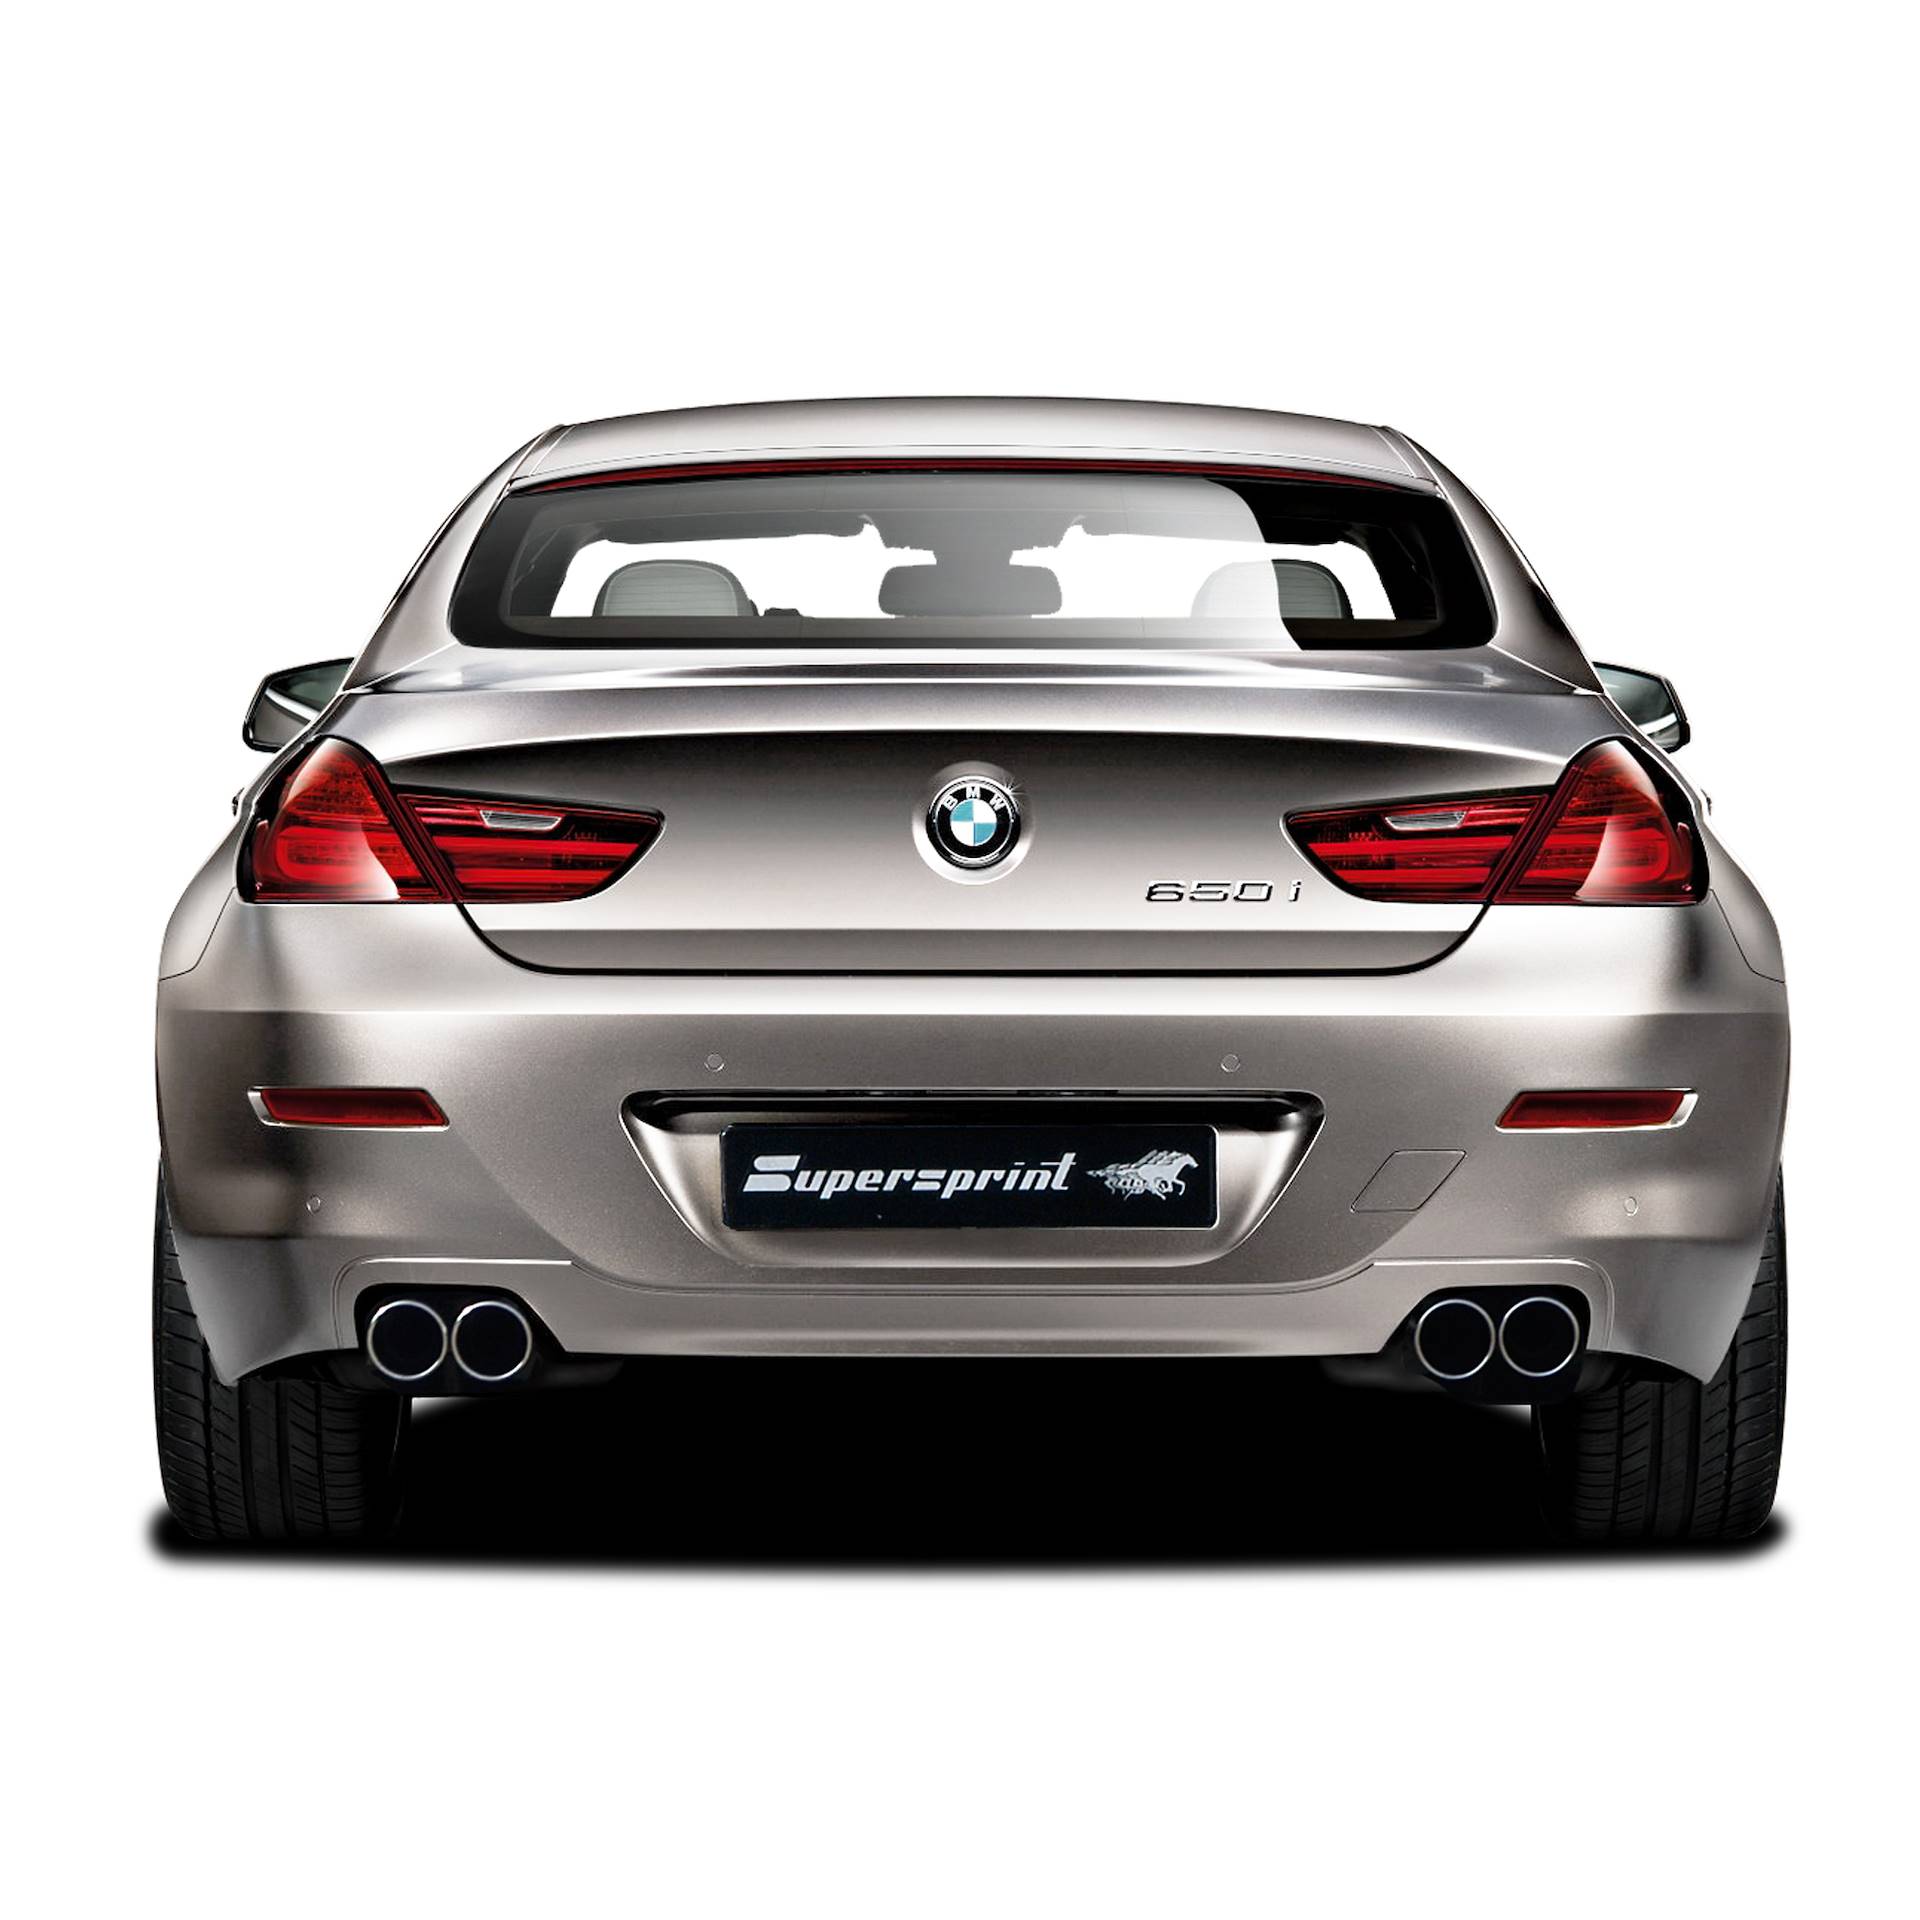 Performance sport exhaust for BMW F06 650i Gran Coupè xDrive, BMW F06 650i  Gran Coupè xDrive (450 Hp) 2012 -> 2017, BMW, exhaust systems